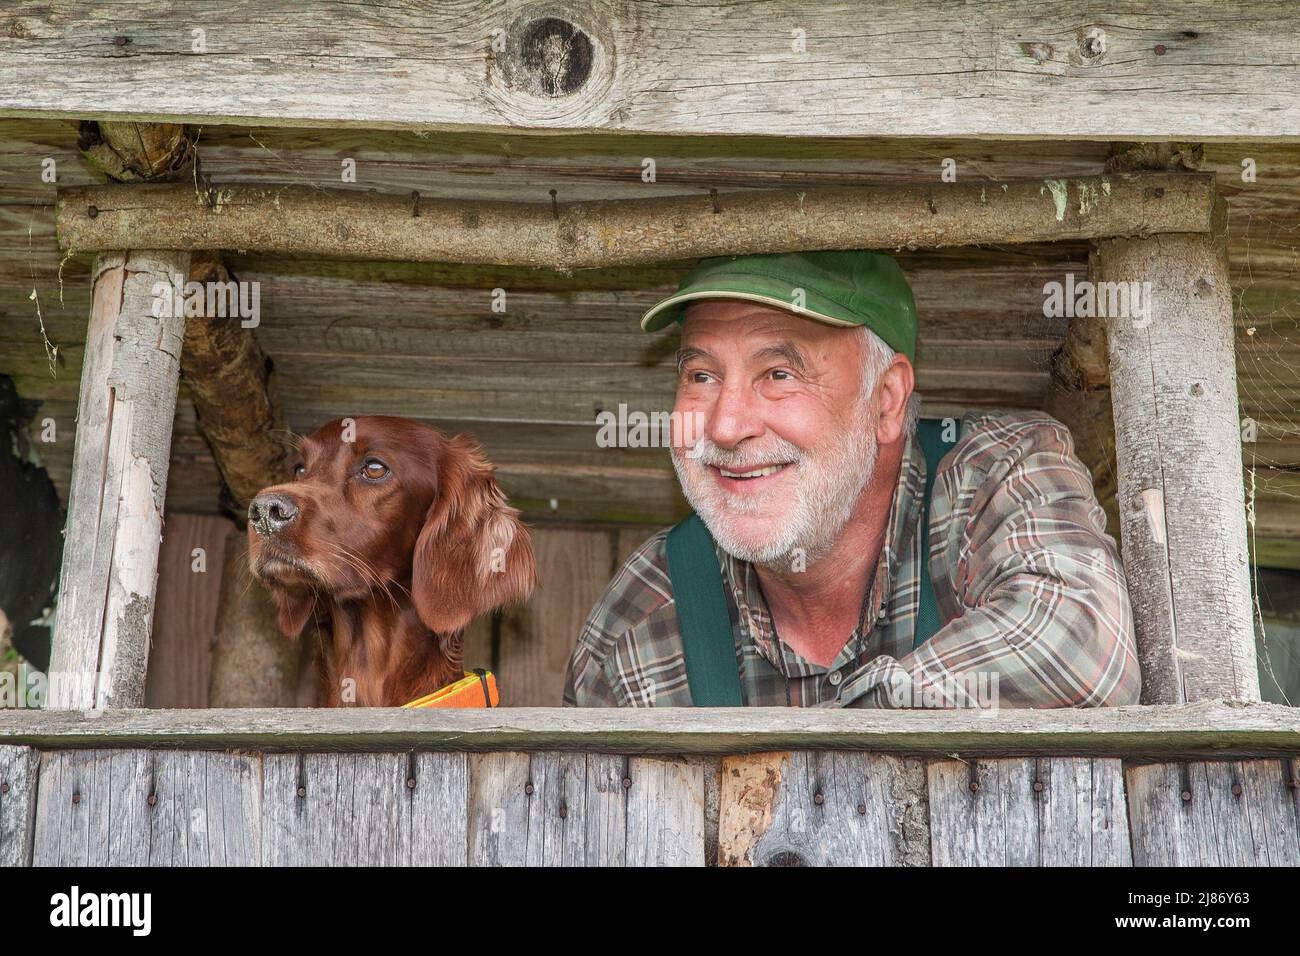 A hunter and his dog watch the passing game from the hunting pulpit and have fun together. Stock Photo